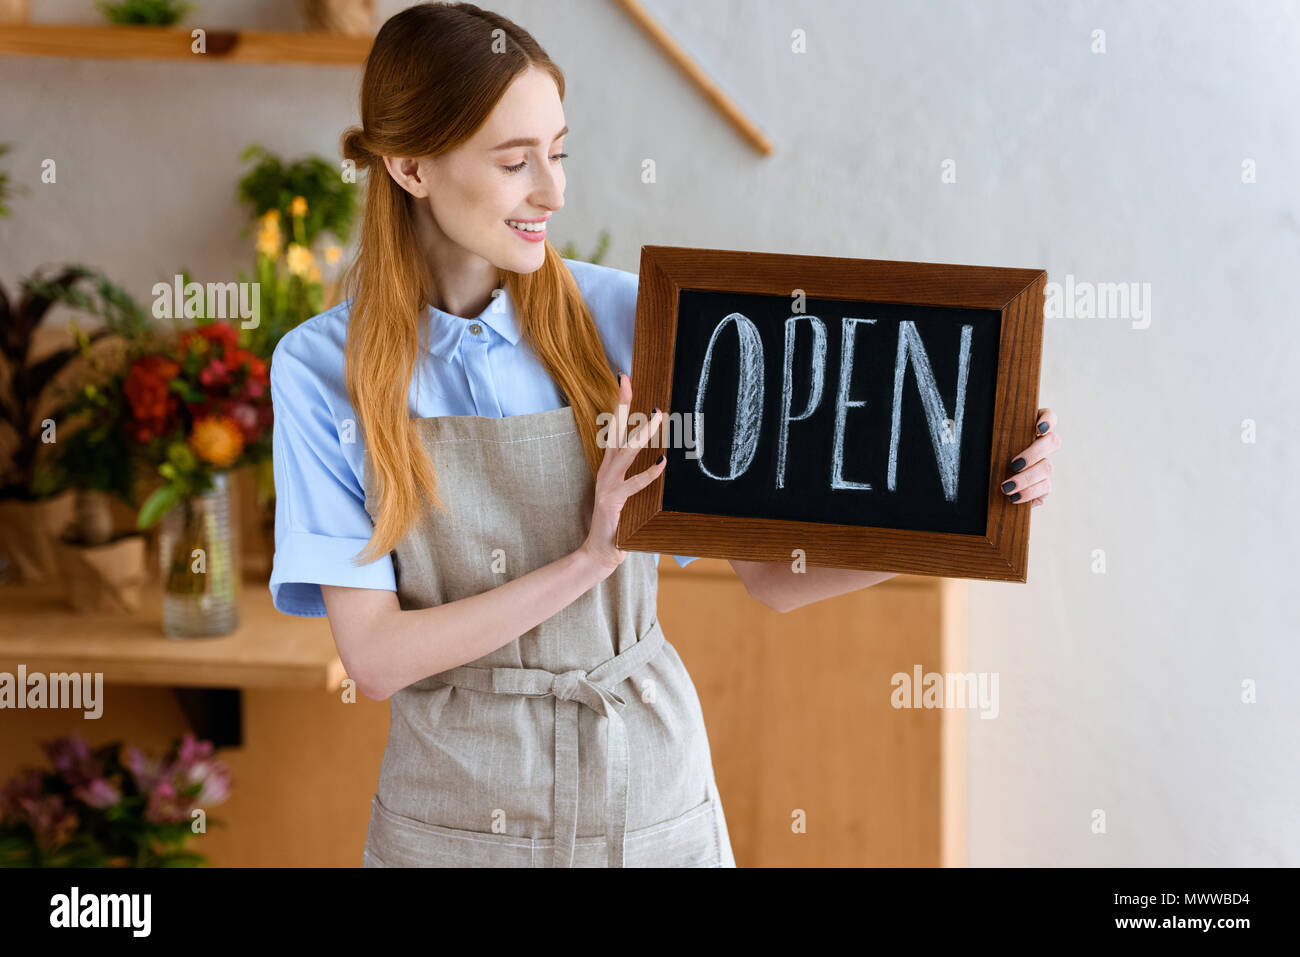 beautiful smiling young florist holding sign open in flower shop Stock Photo